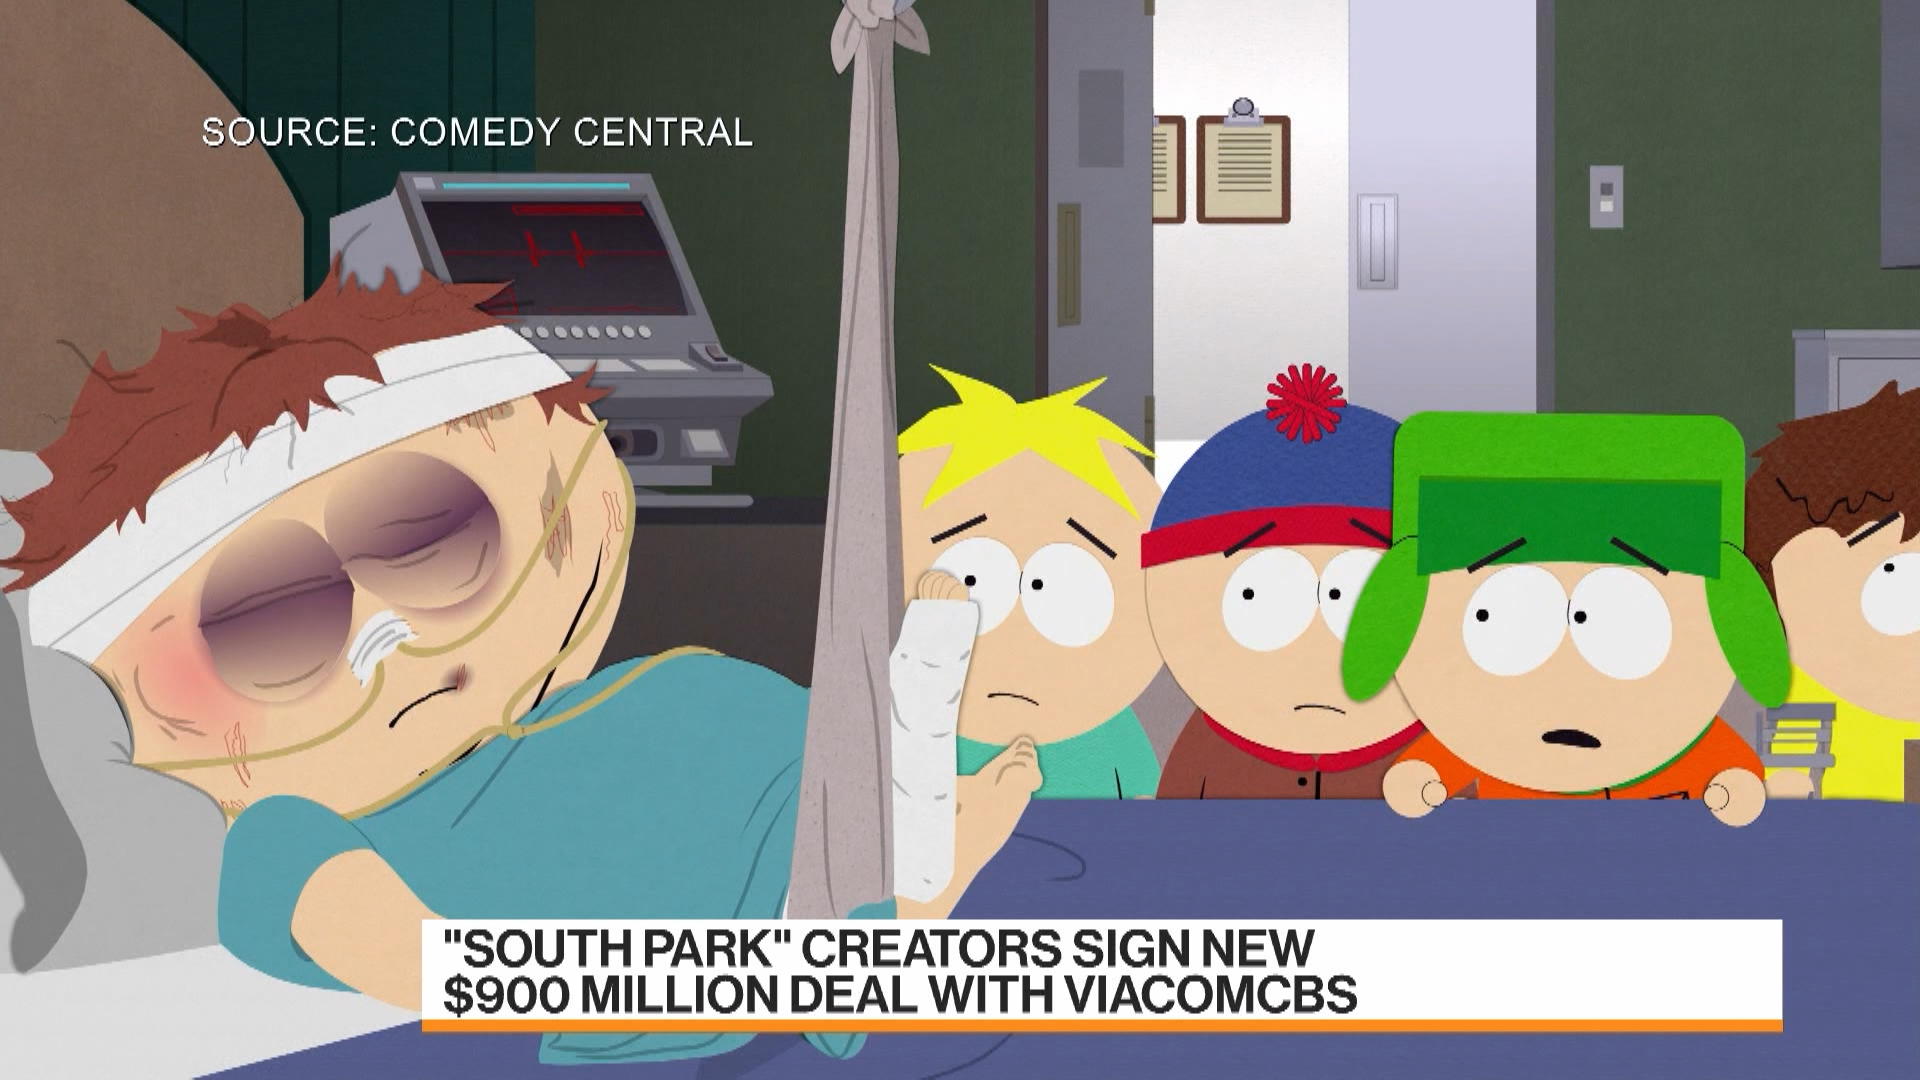 South Park' Creators Trey Parker and Matt Stone Sign New ViacomCBS Deal, 14  Movies Planned for Paramount+ – The Hollywood Reporter